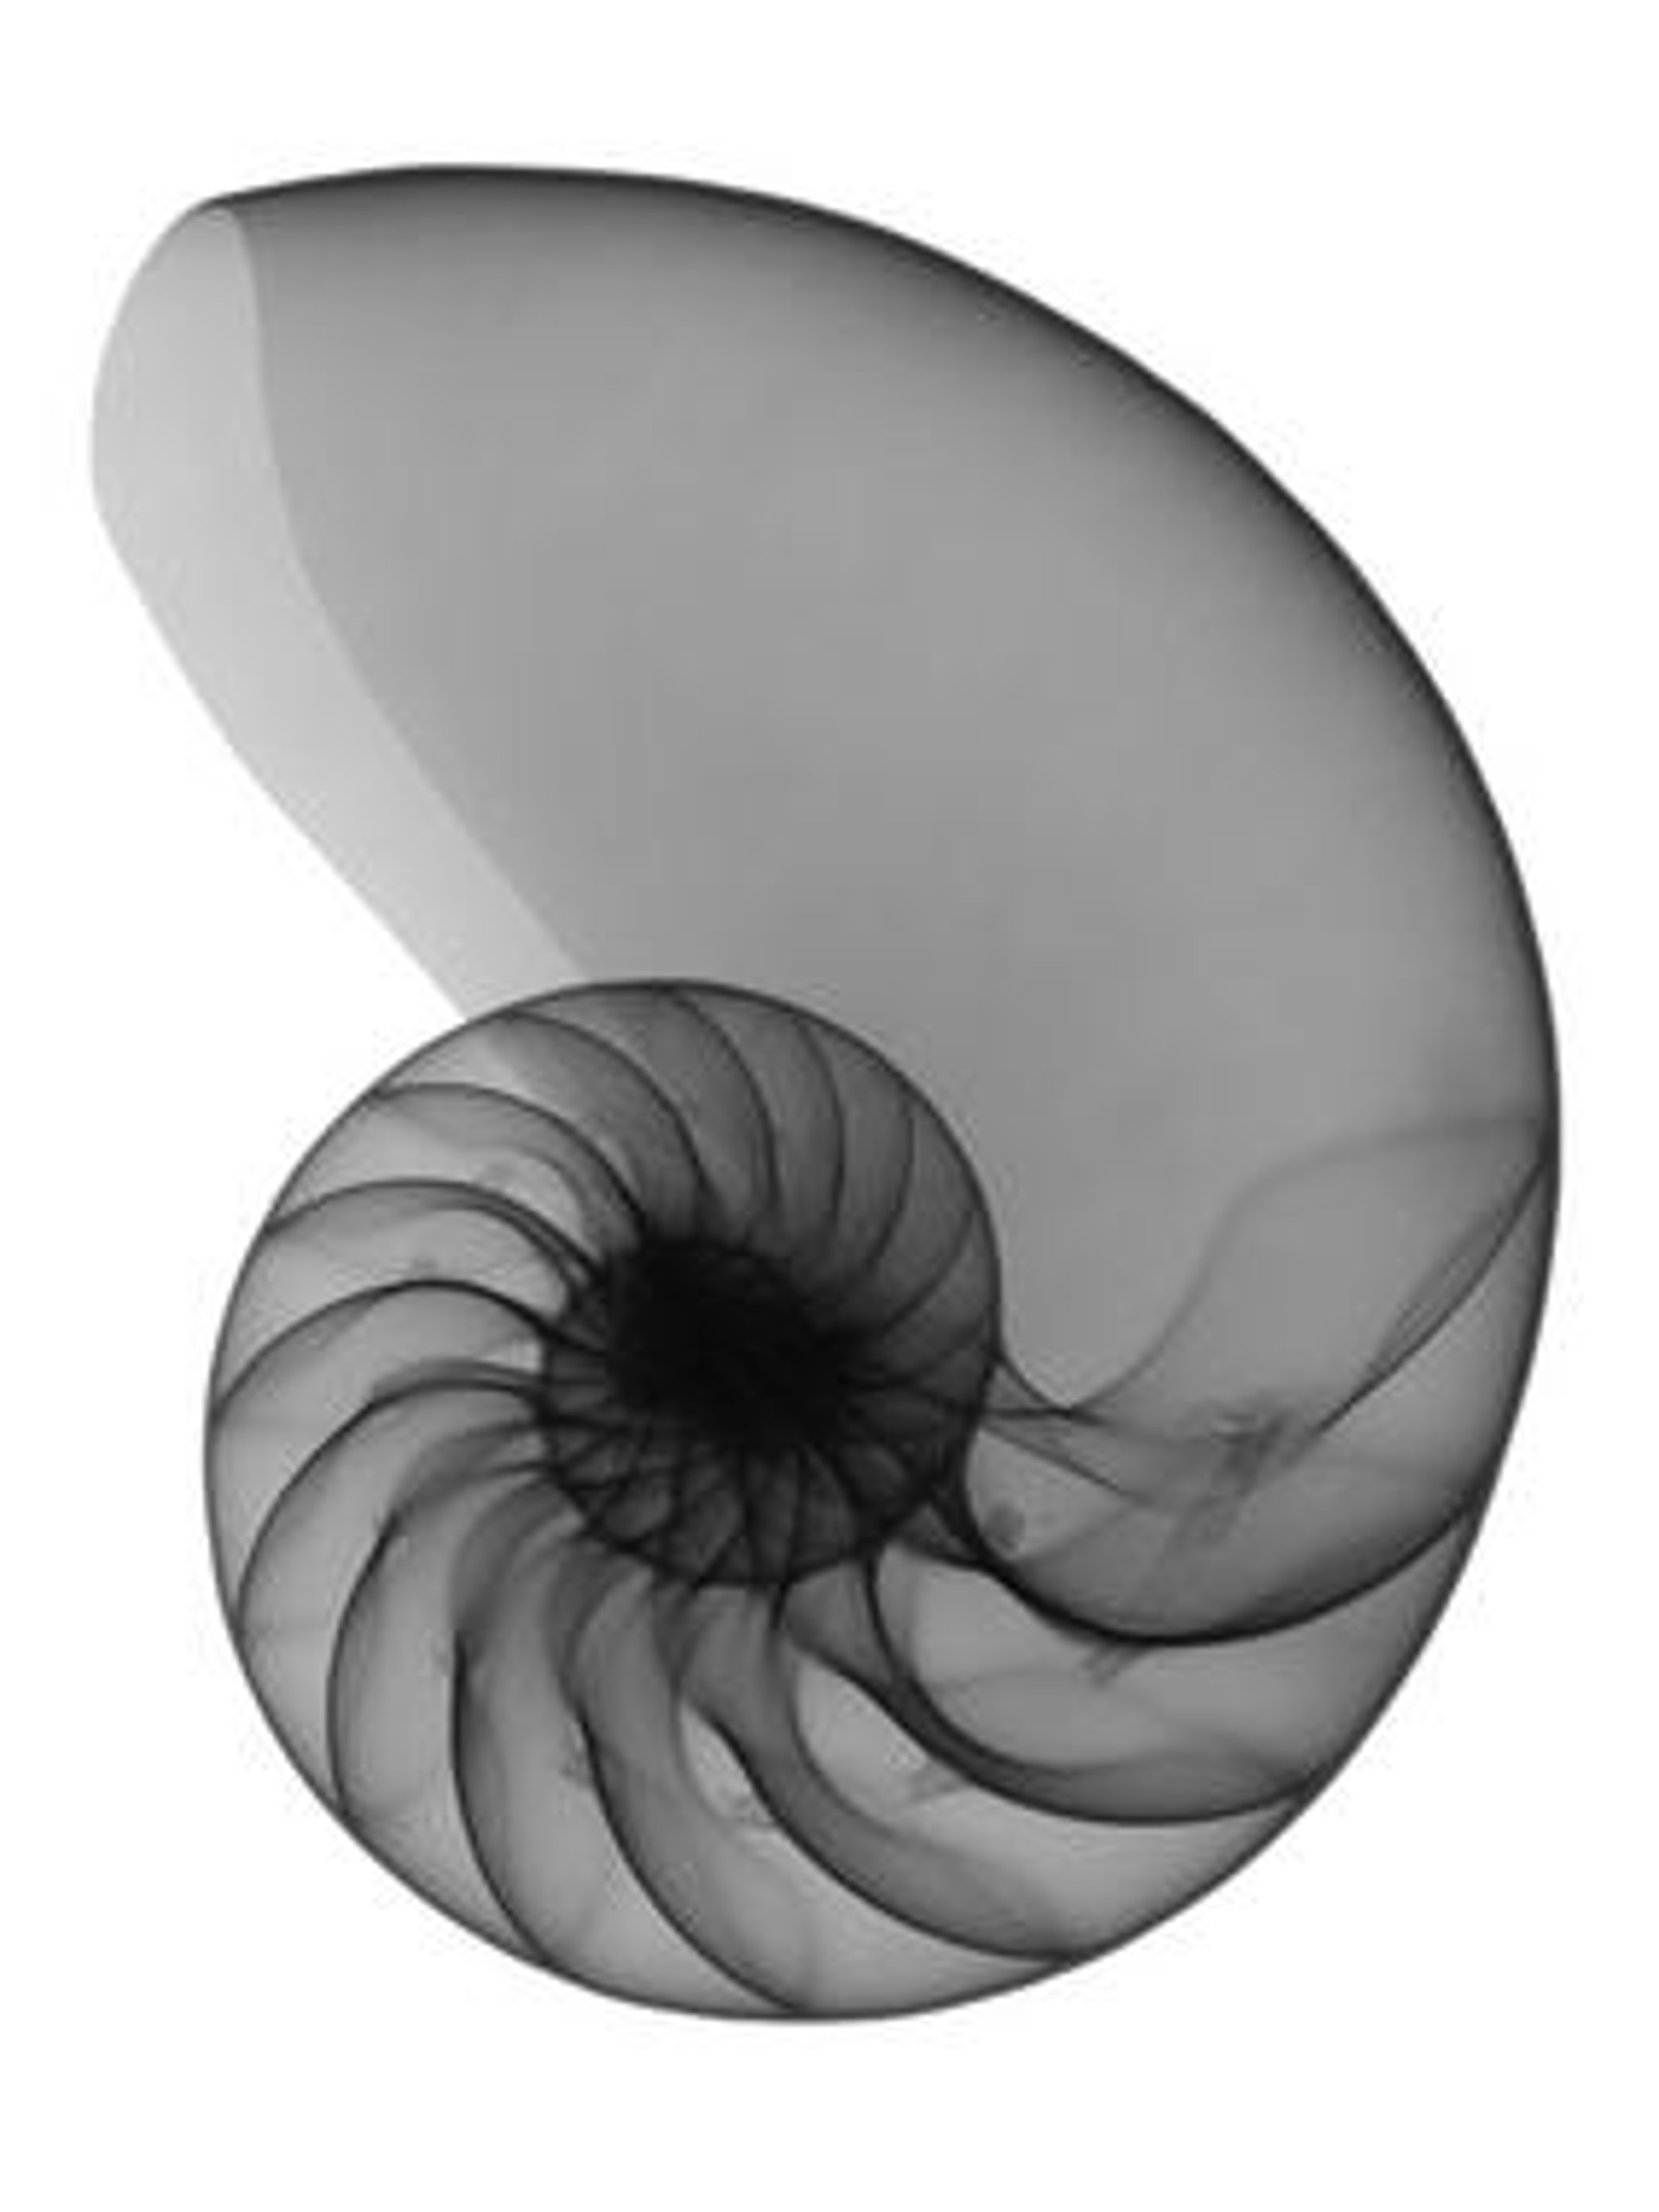 Chambered Nautilus #1 by Don Dudenbostel